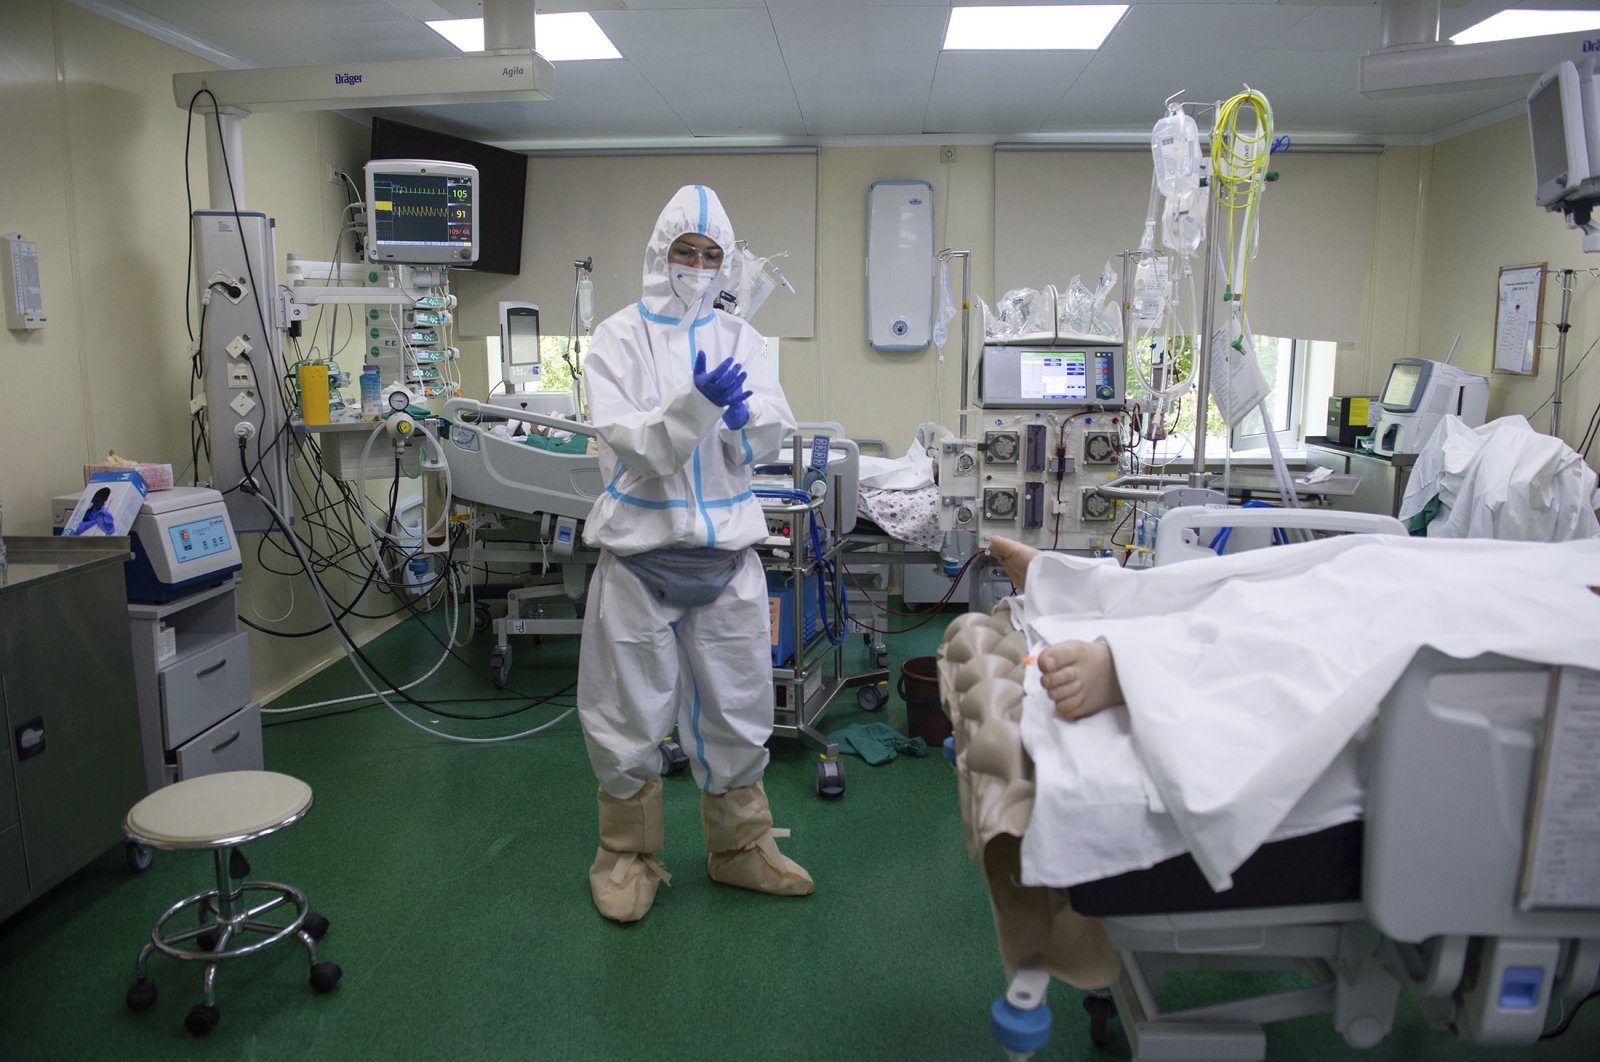 A medic wearing a special suit to protect against coronavirus prepares to treat a patient with coronavirus at the City hospital No. 52 for coronavirus patients in Moscow, Russia, July 13, 2021. (AP Photo)